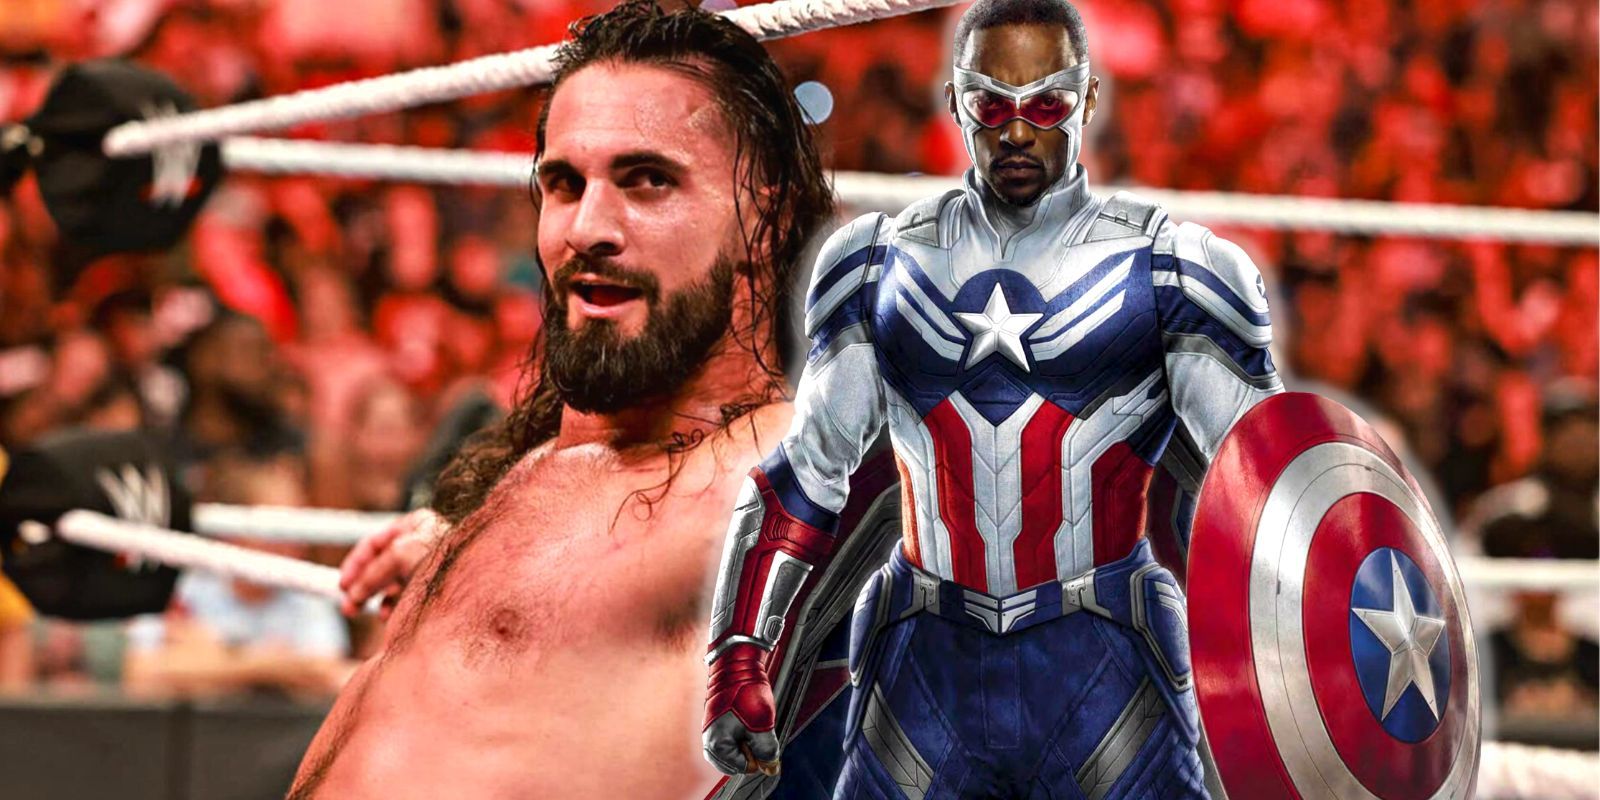 Seth Rollins leans on the ropes alongside Anthony Mackie's Captain America